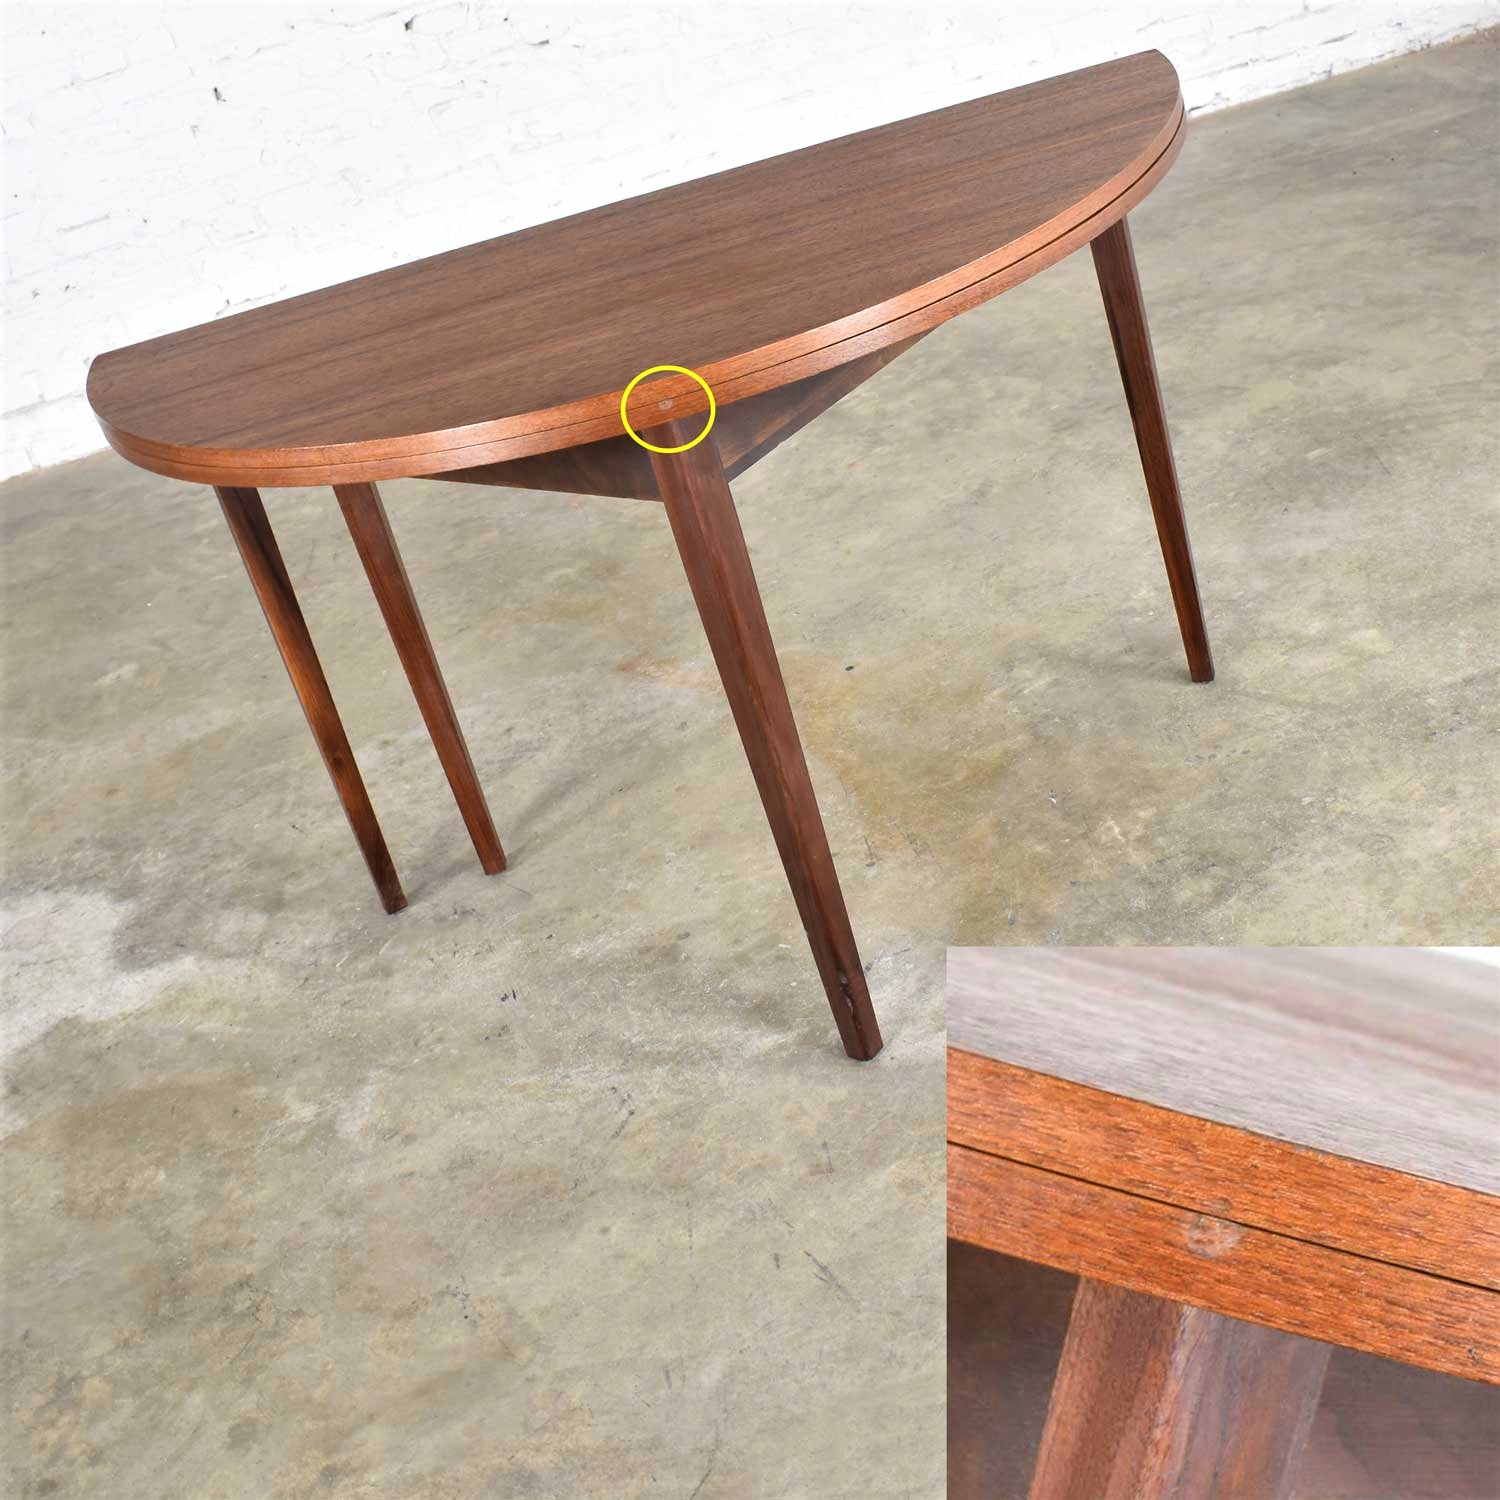 Mid Century Modern Walnut Round Flip Top or Folding Dining Table to Demilune Table 1960